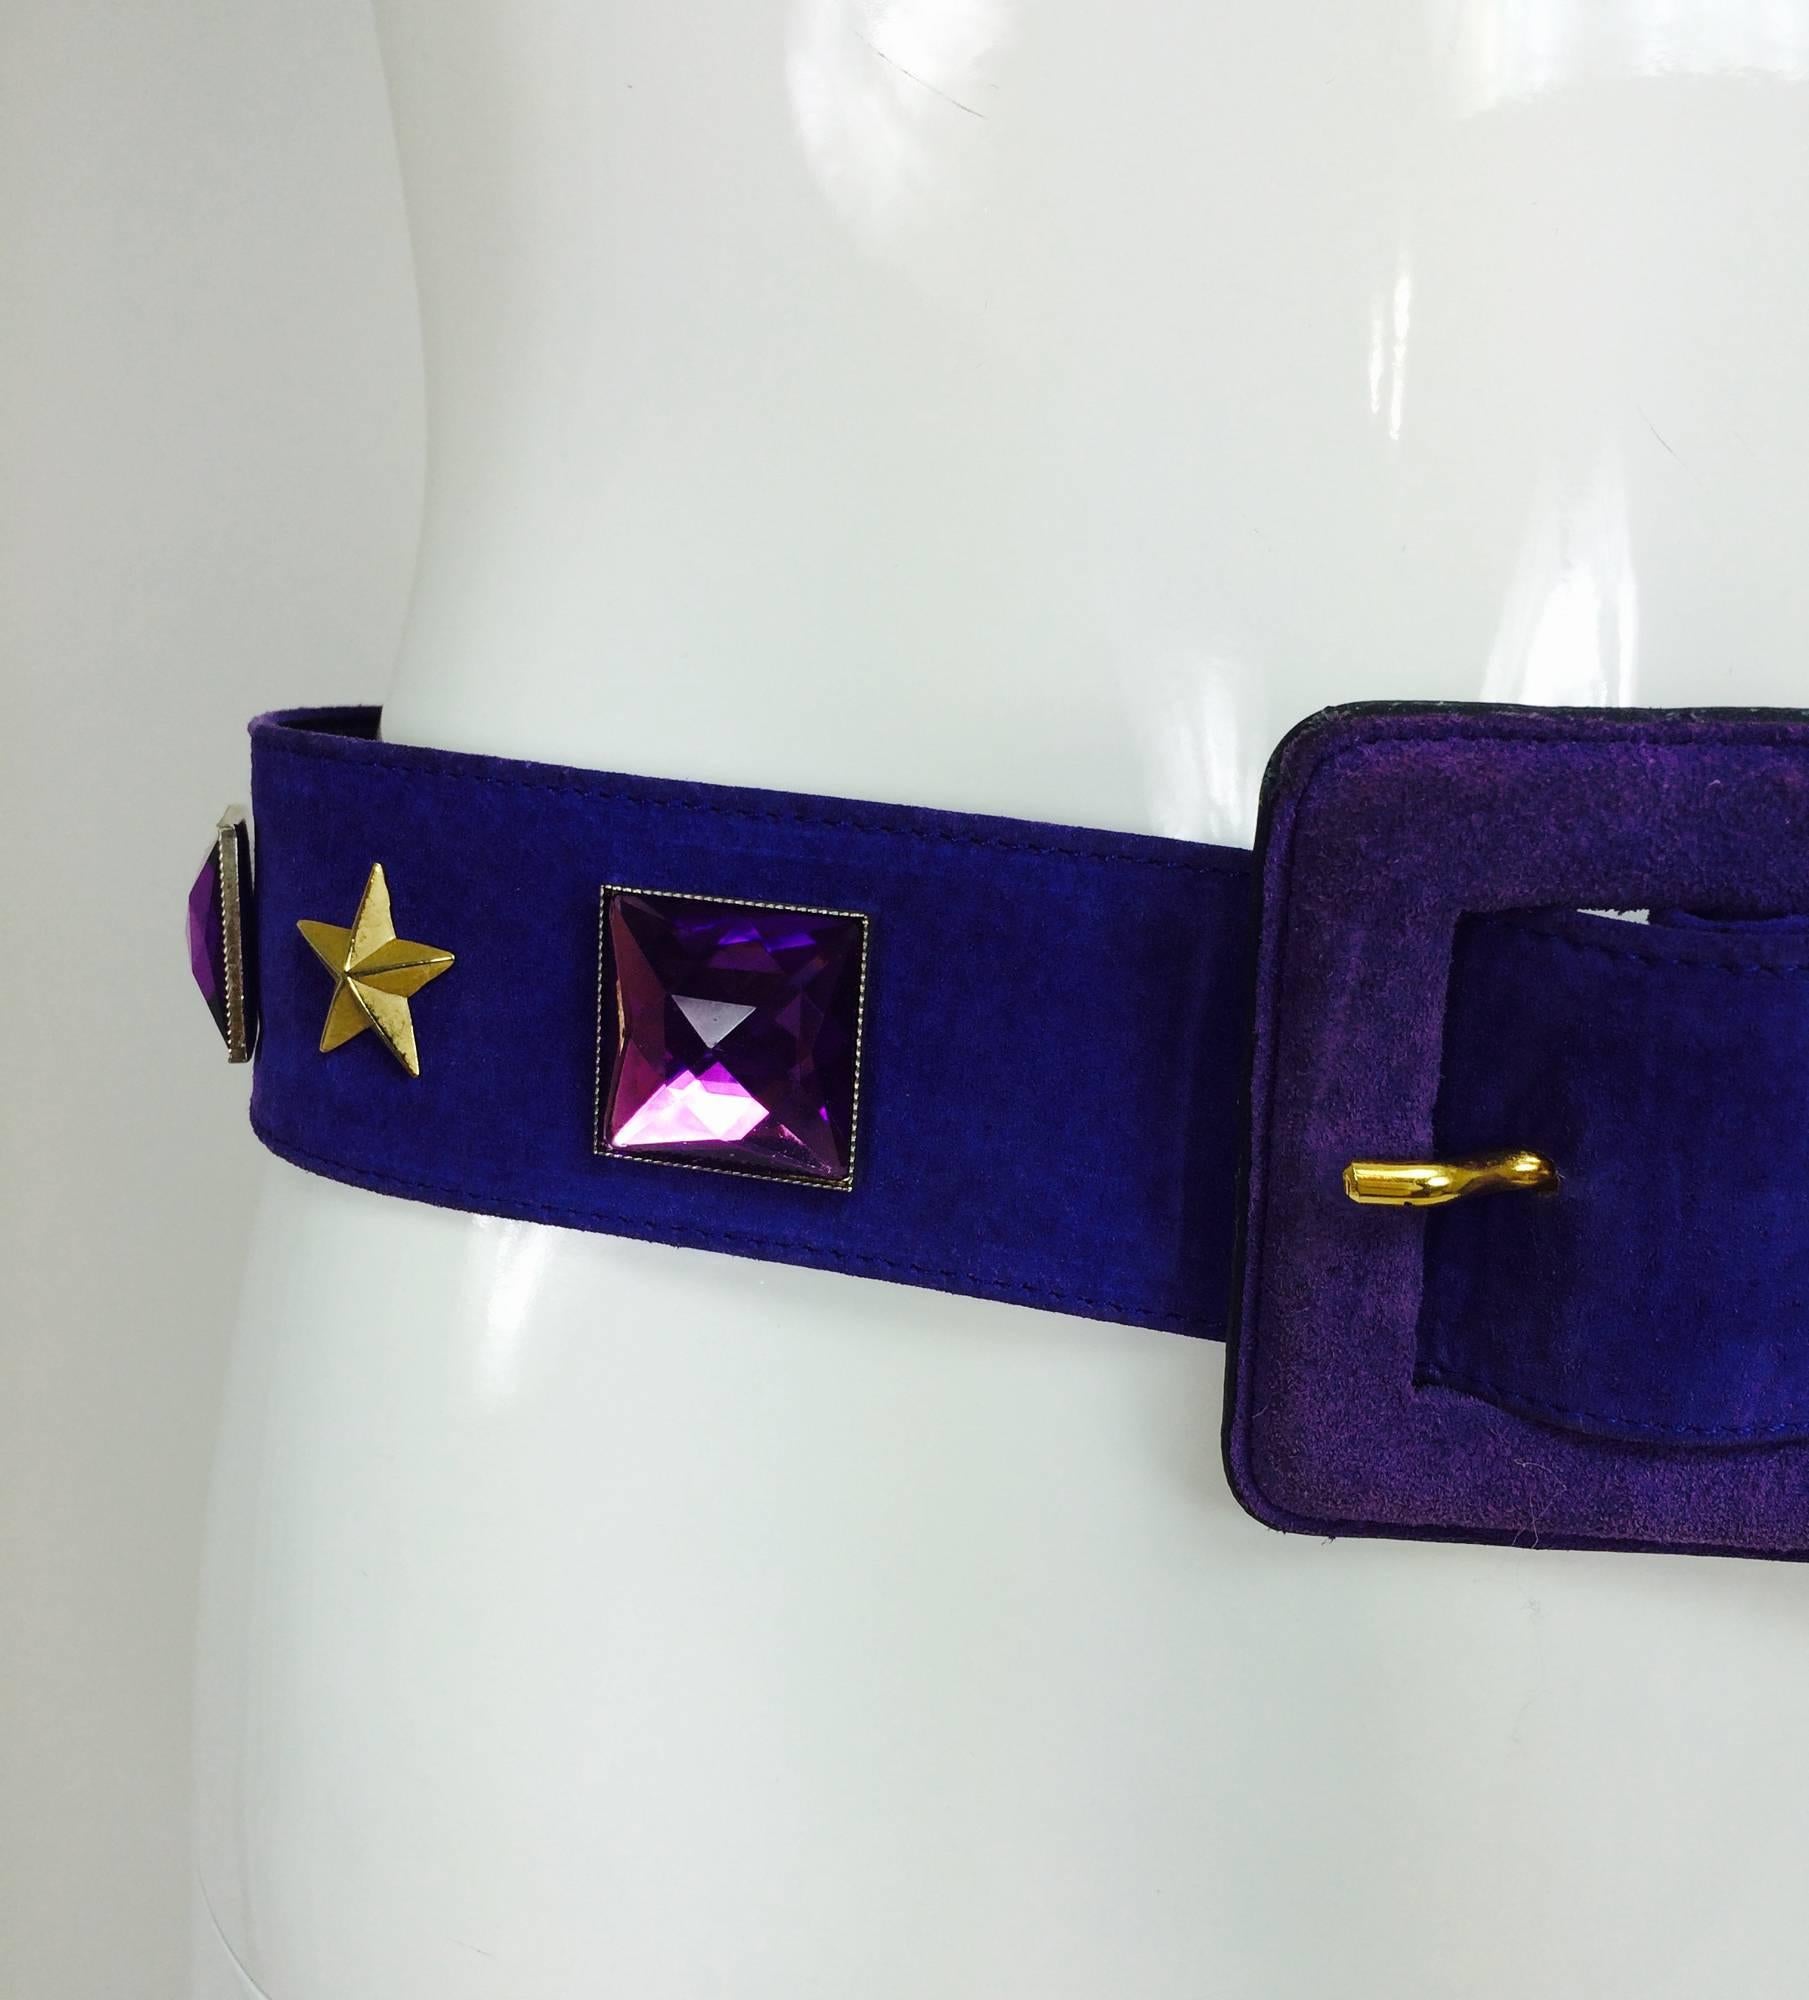 Vintage Yves St Laurent jeweled purple suede belt 1980s...Wide purple suede belt set with large purple stones, studs & stars, the end of the belt is covered in gold embossed leather...Lined in leather...In very good vintage